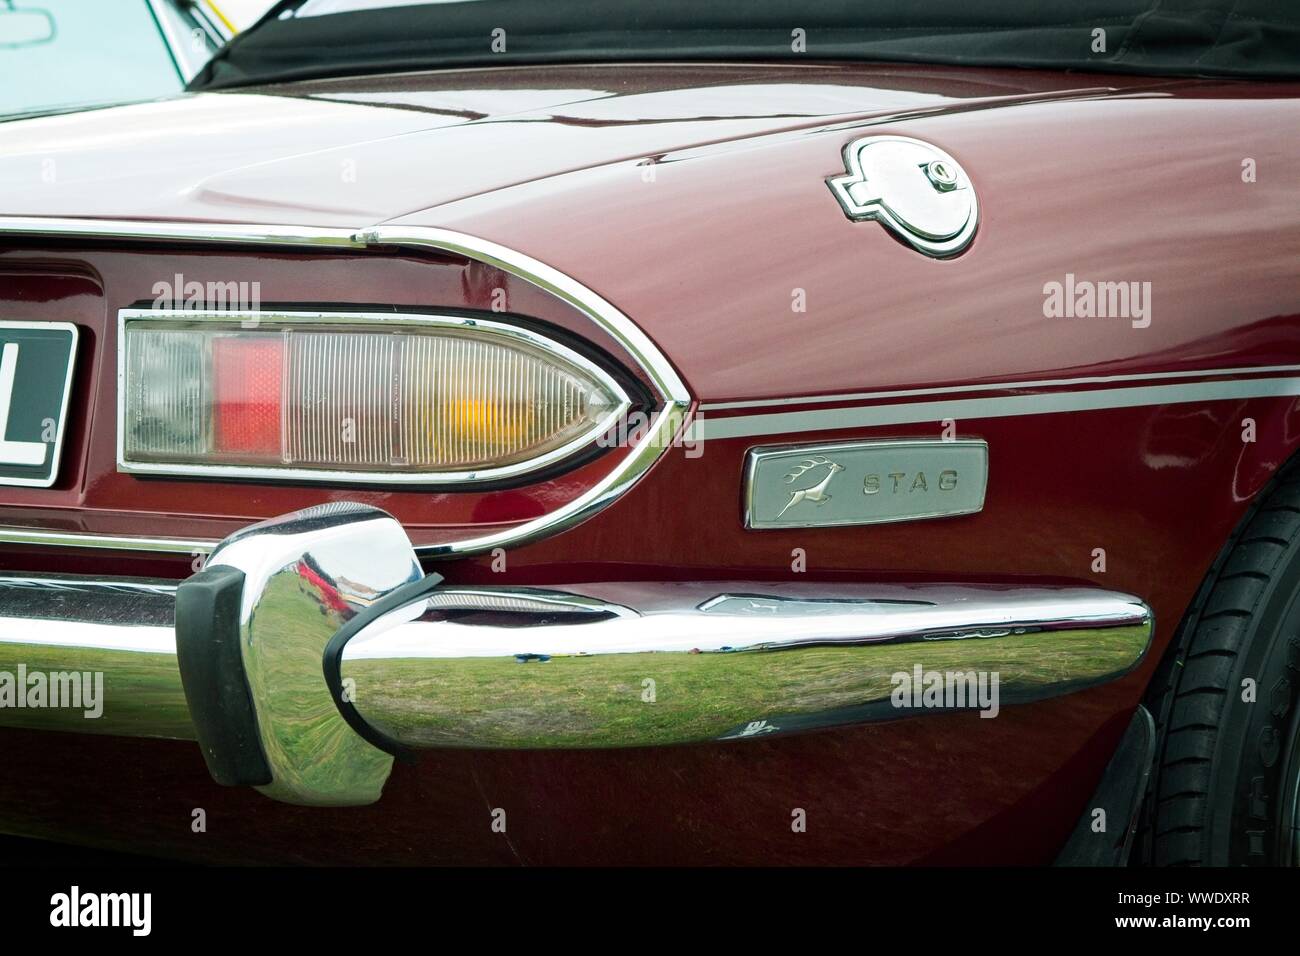 Right side rear quarter detail of a Triumph Stag classic British sports car showing chrome bumper, light cluster and Stag badge. Stock Photo